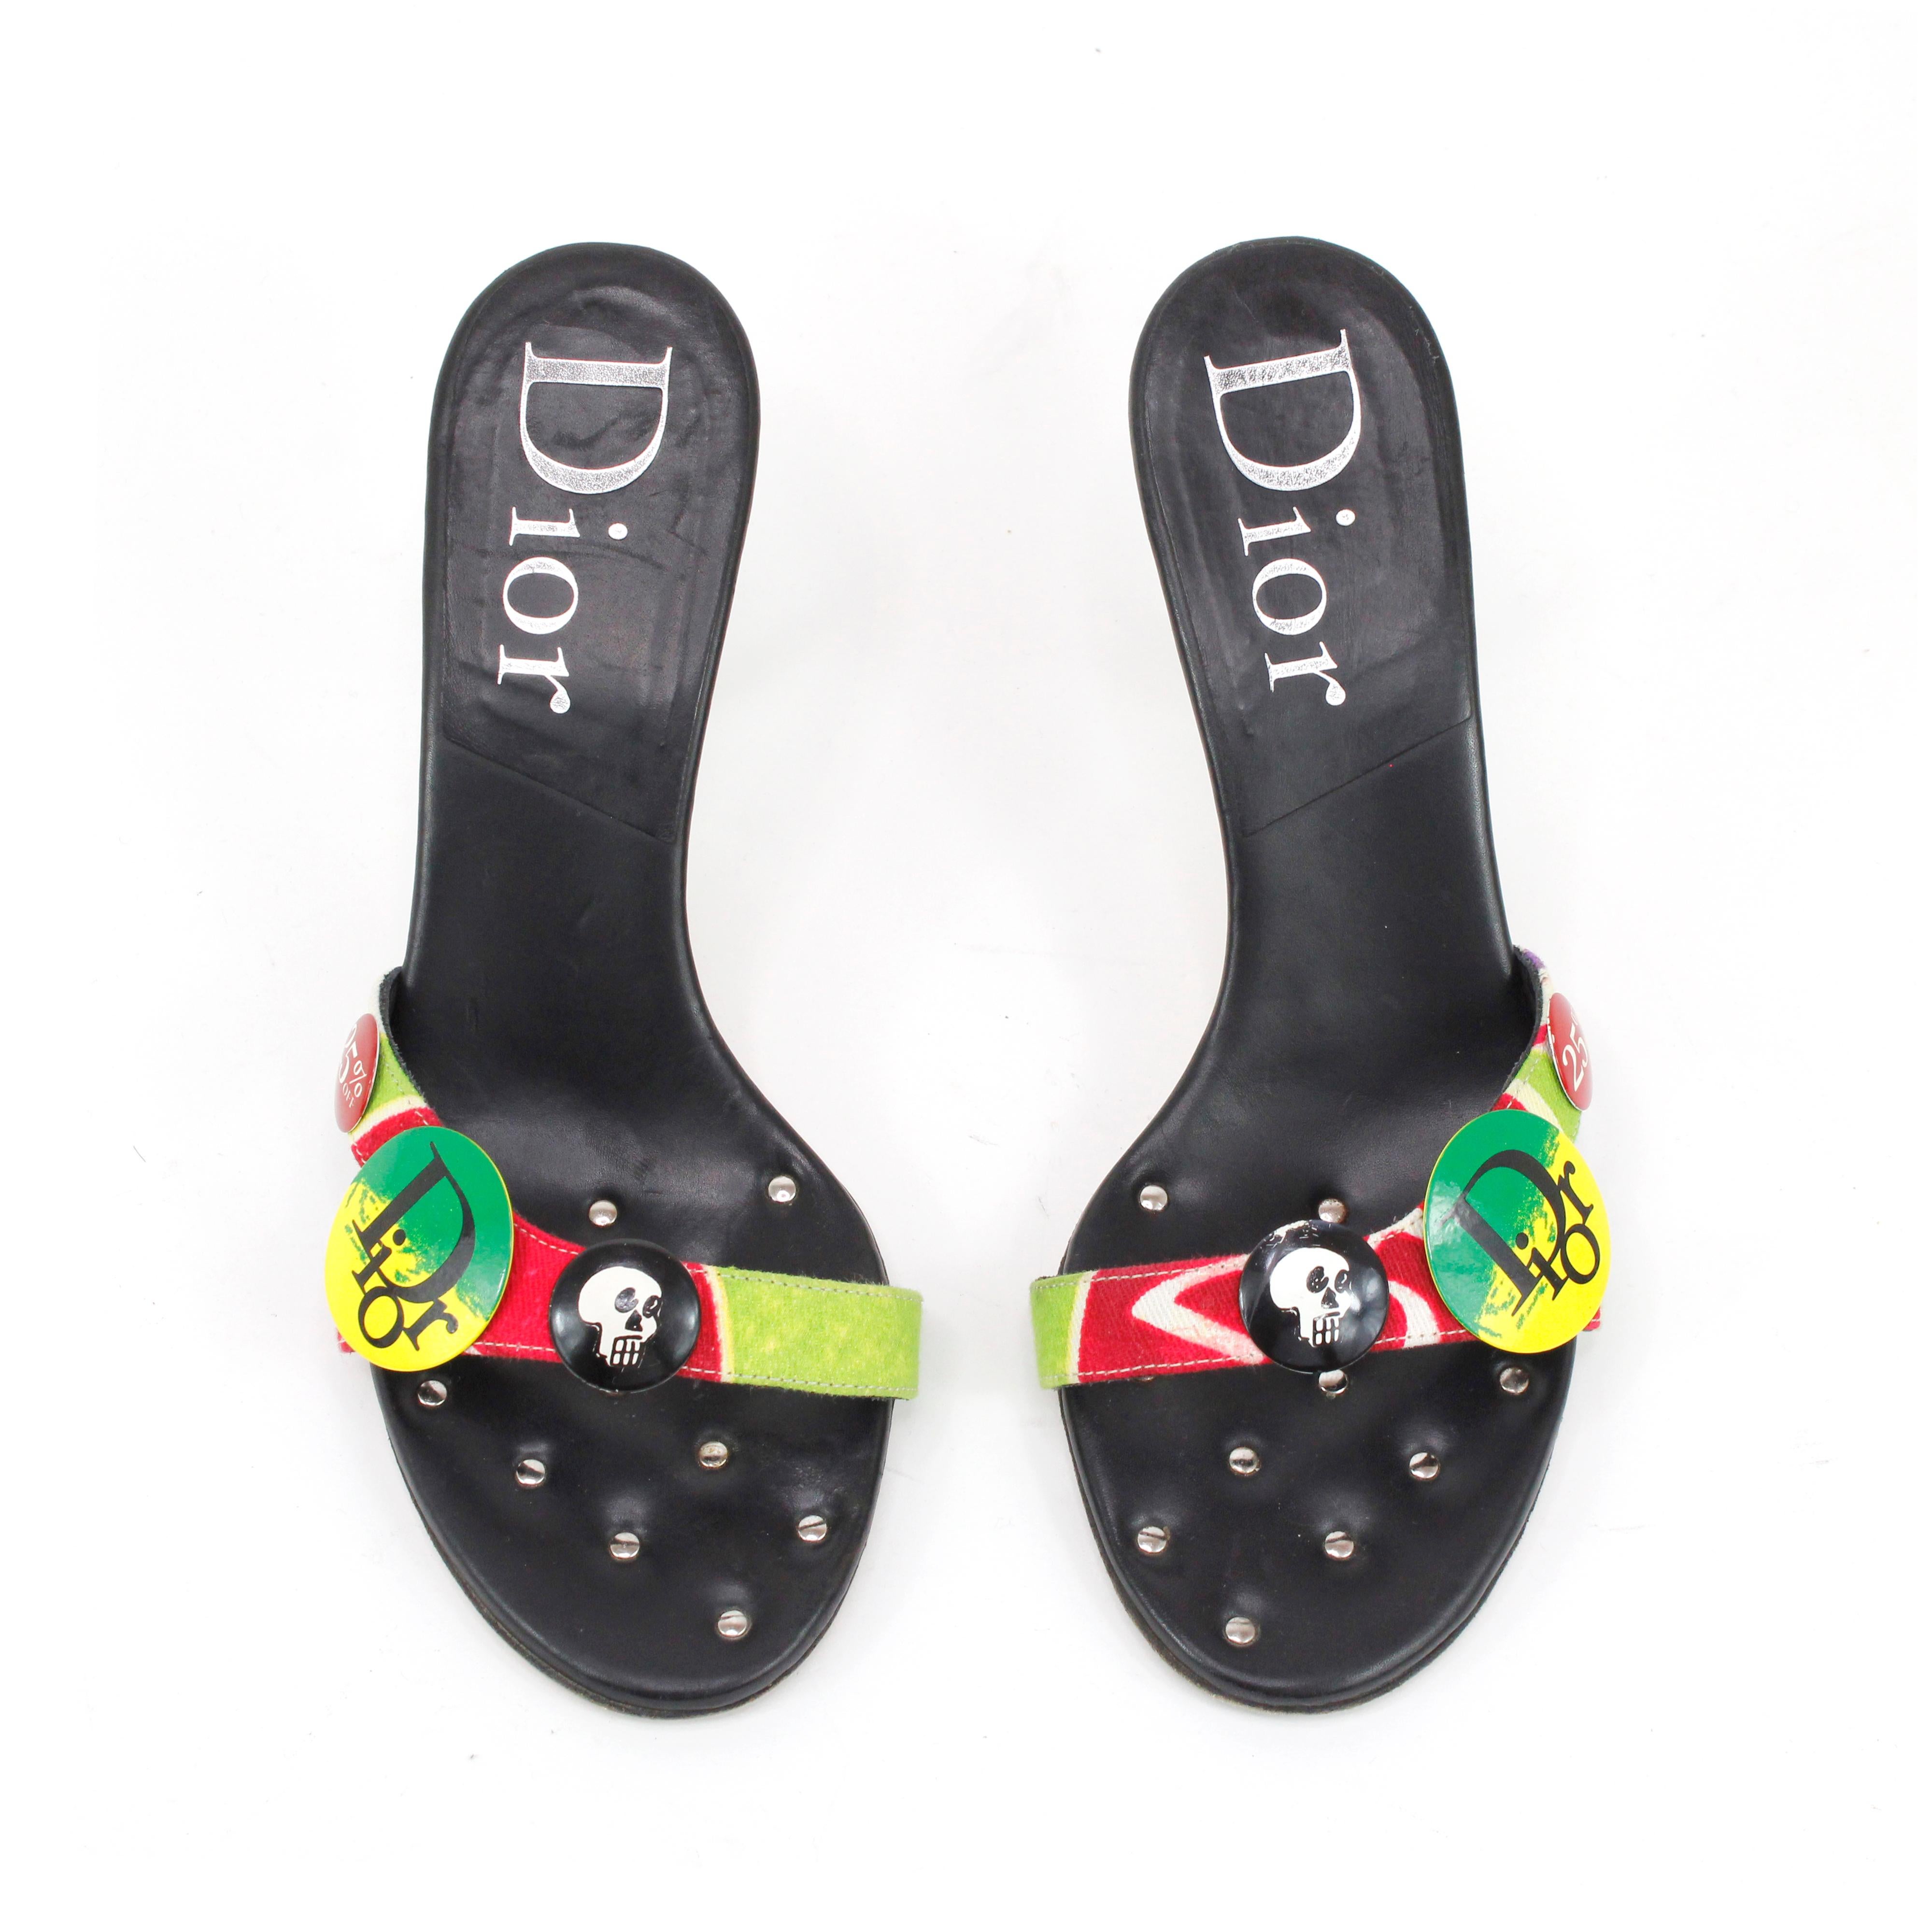 Dior by John Galliano 2000s Dior Fashion Victim mules in leather, with multicolored brooch, size 36 EU.


Condition:
Good/really good.